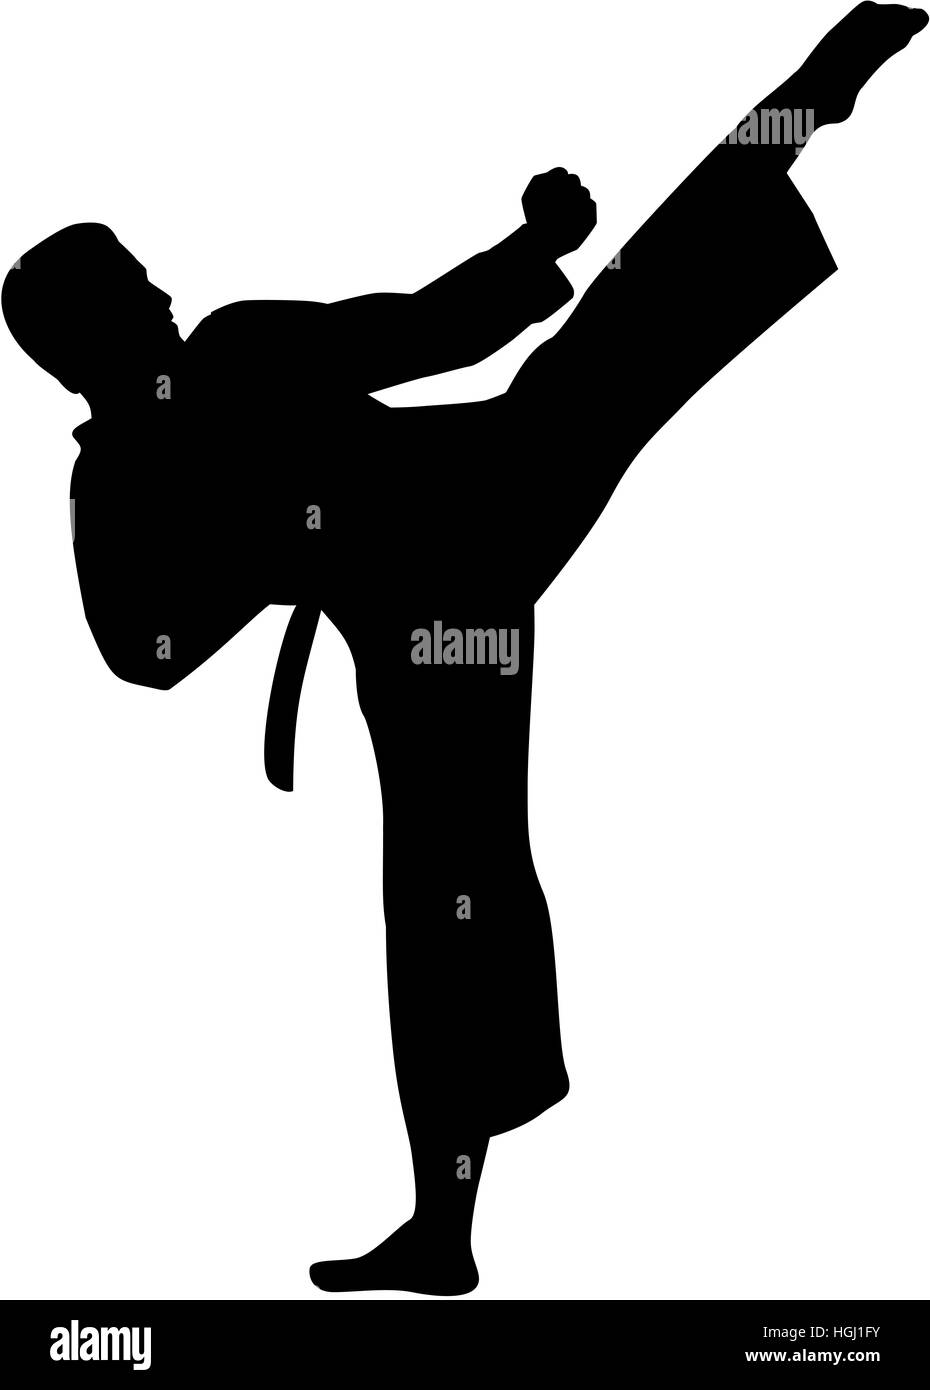 Karate fighter silhouette Banque D'Images